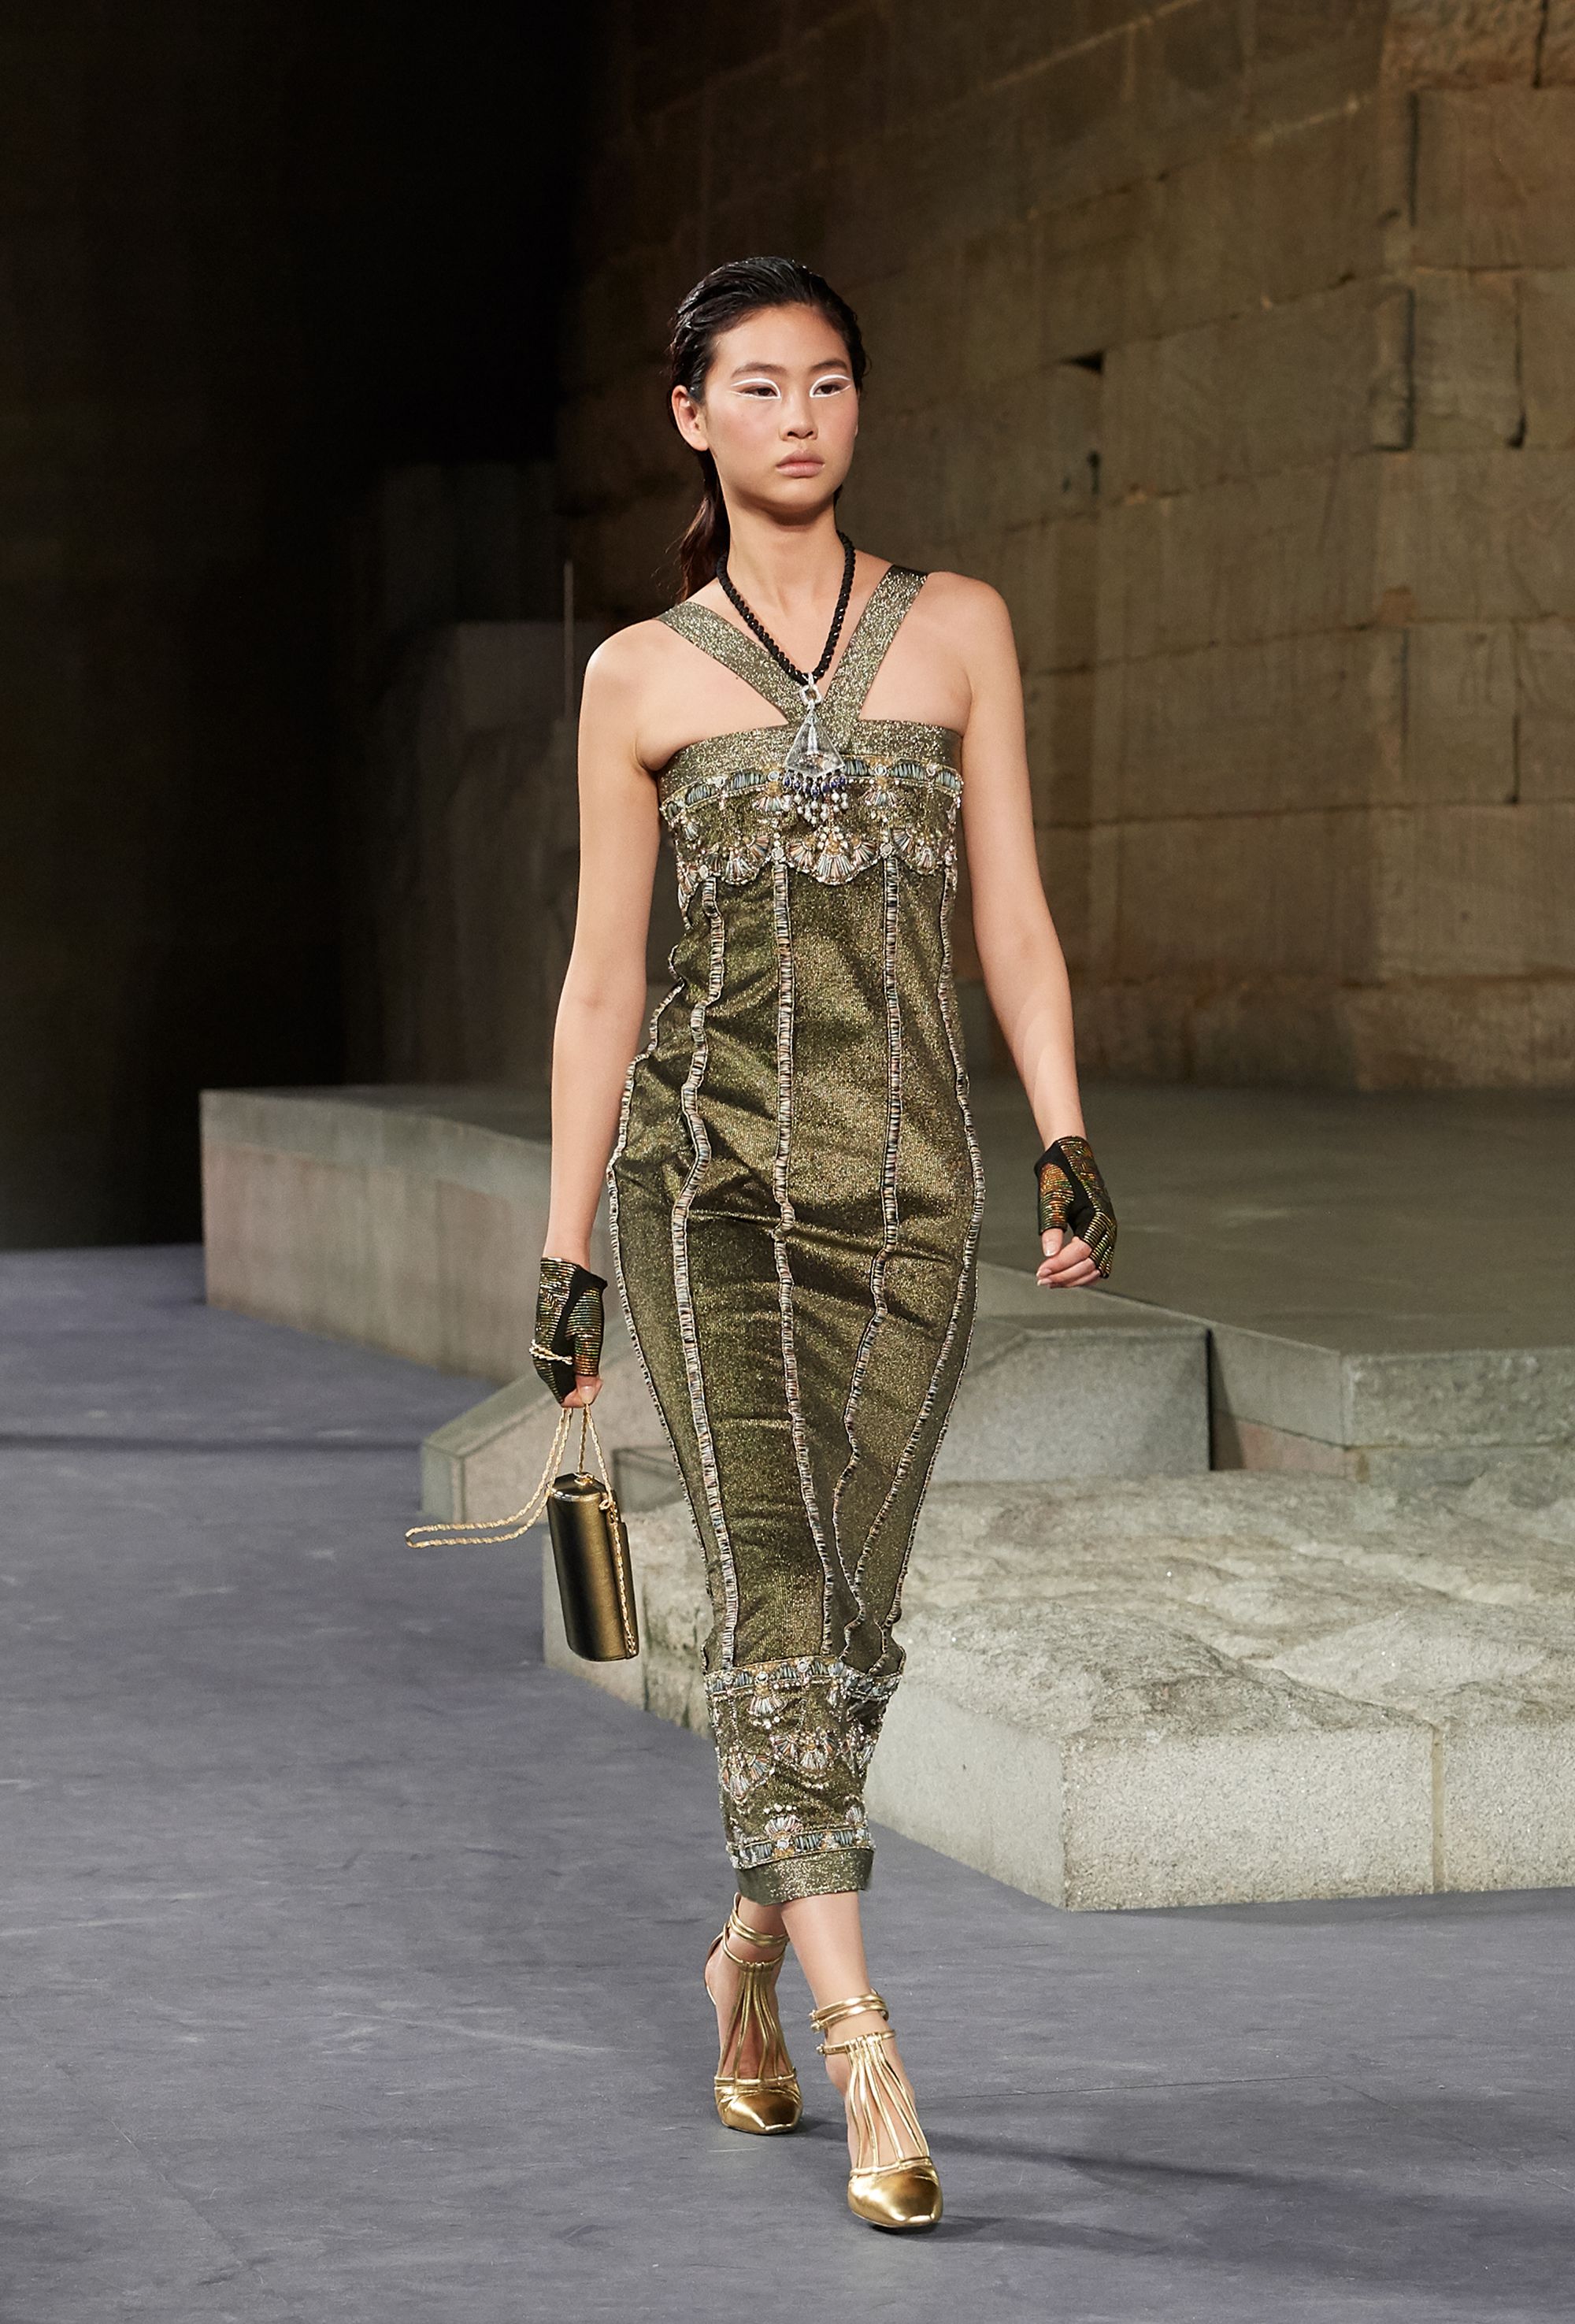 HoYeon Jung at the Chanel Show During Paris Fashion Week in 2019